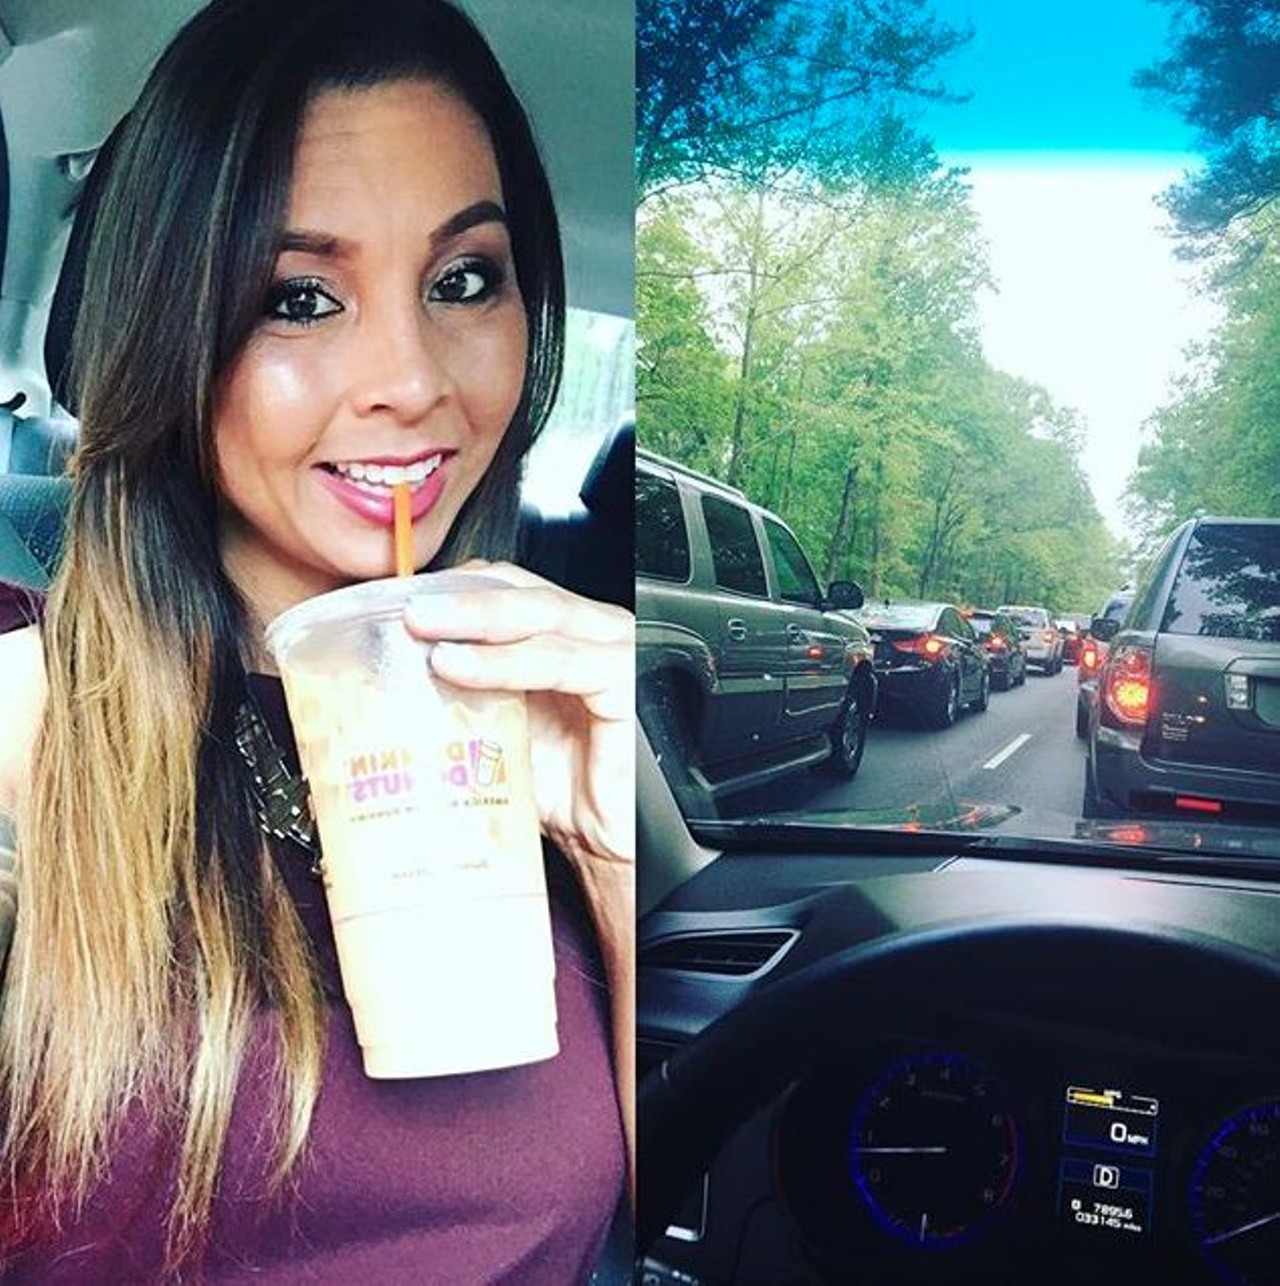 &#147;I didn&#146;t do my makeup, hair, and get an iced coffee this morning just to sit on I-64 for three hours.&#148;
Photo via thatgirljenn_17